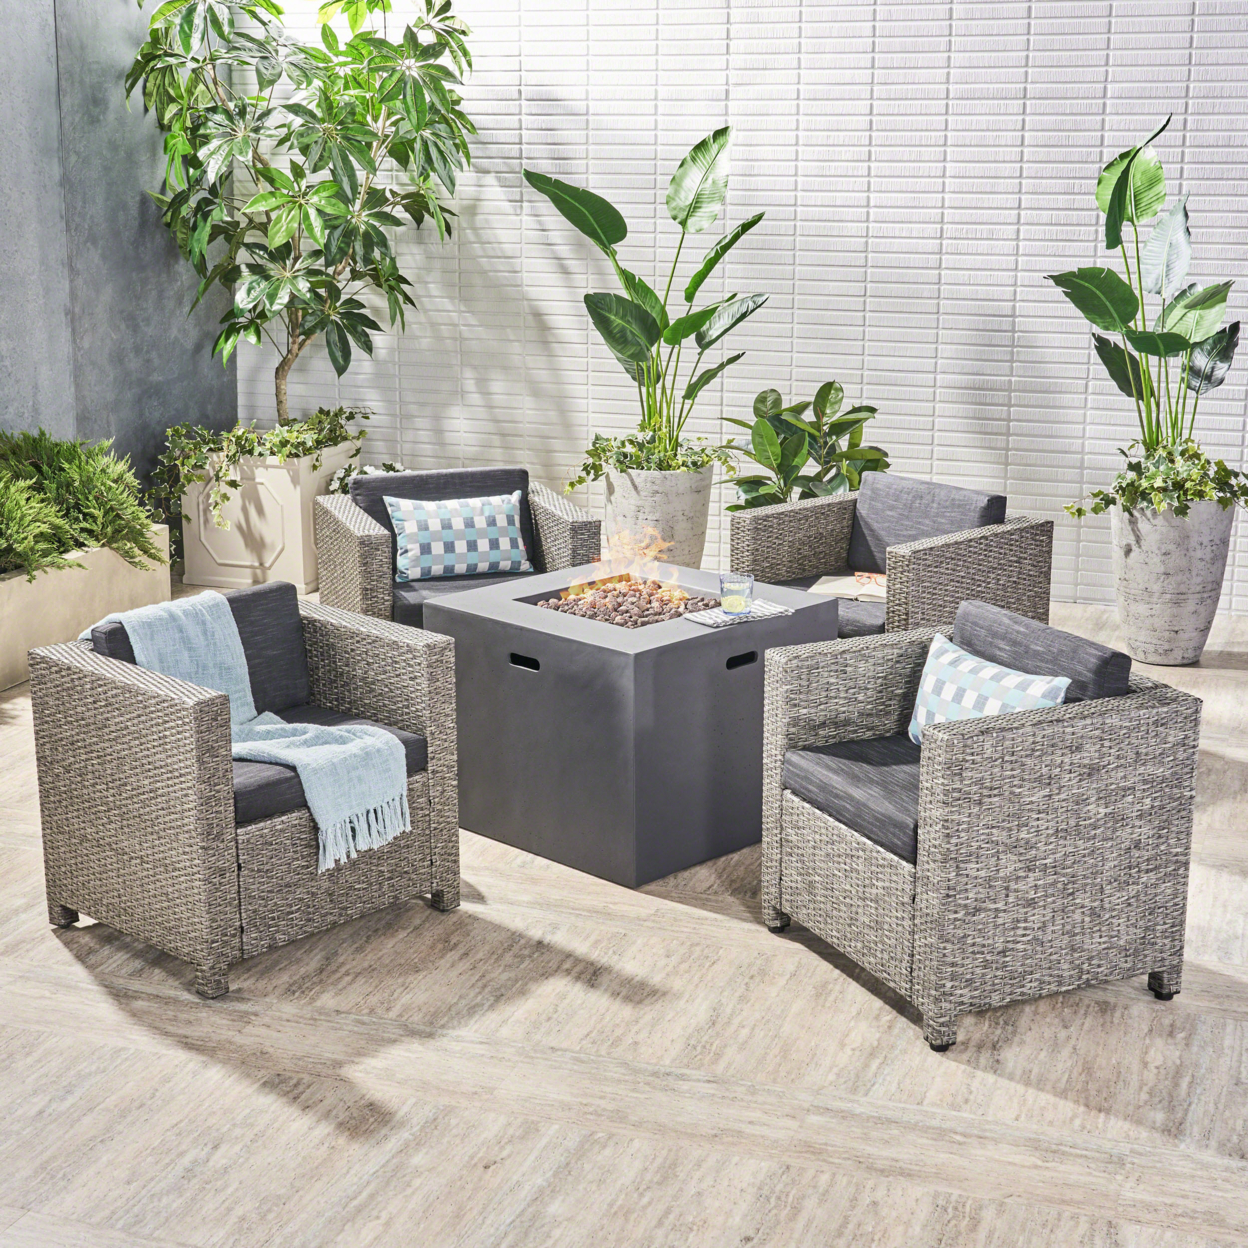 Icey Outdoor 4 Piece Club Chair Set With Square Fire Pit - Gray + Dark Gray